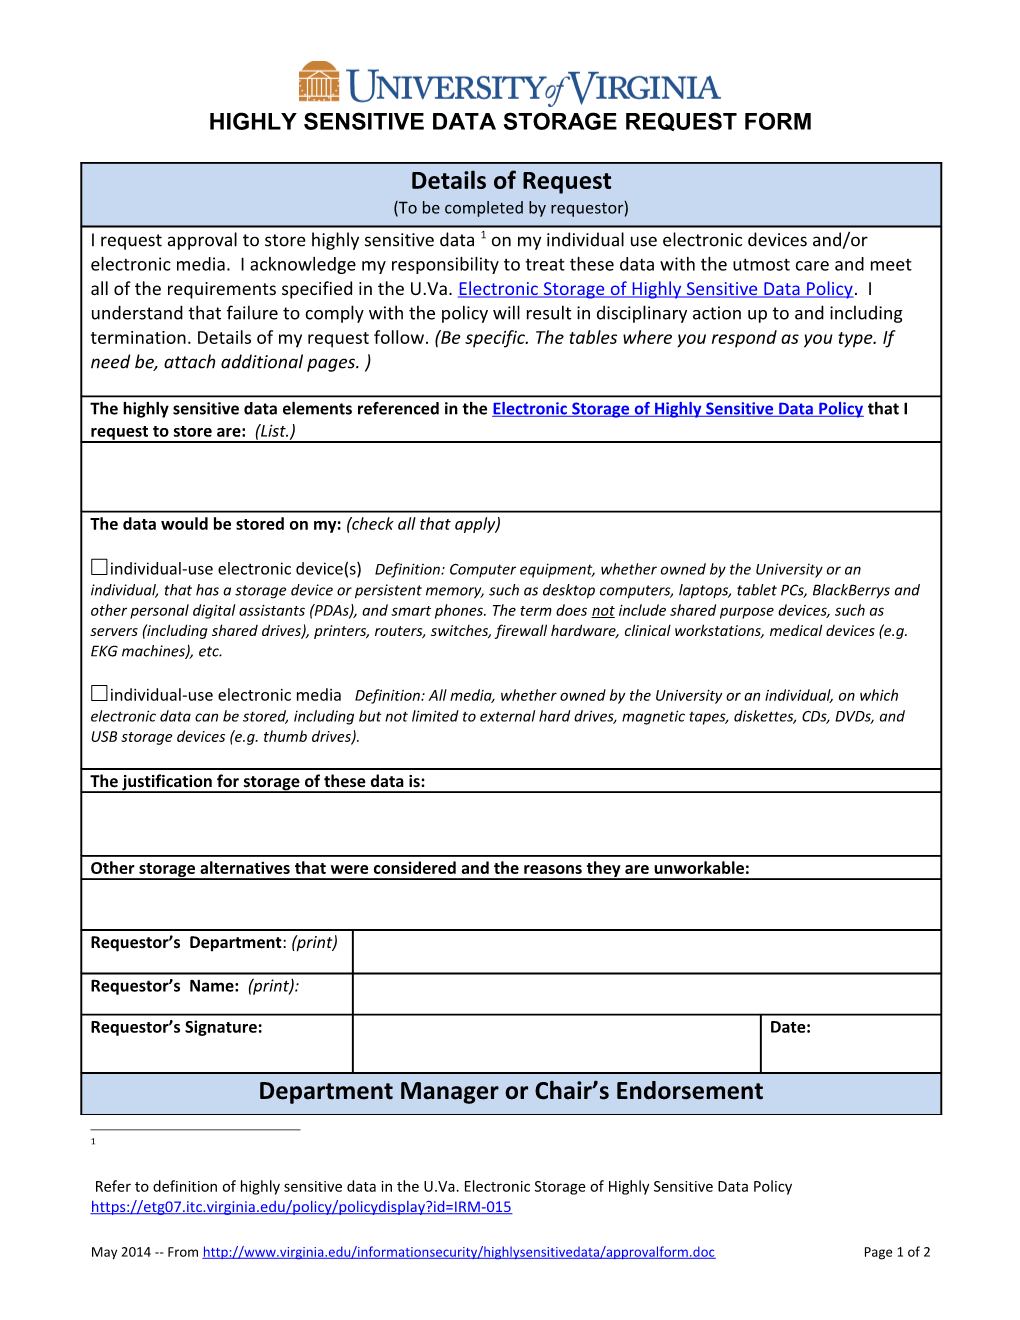 HSD Storage Request Approval Form